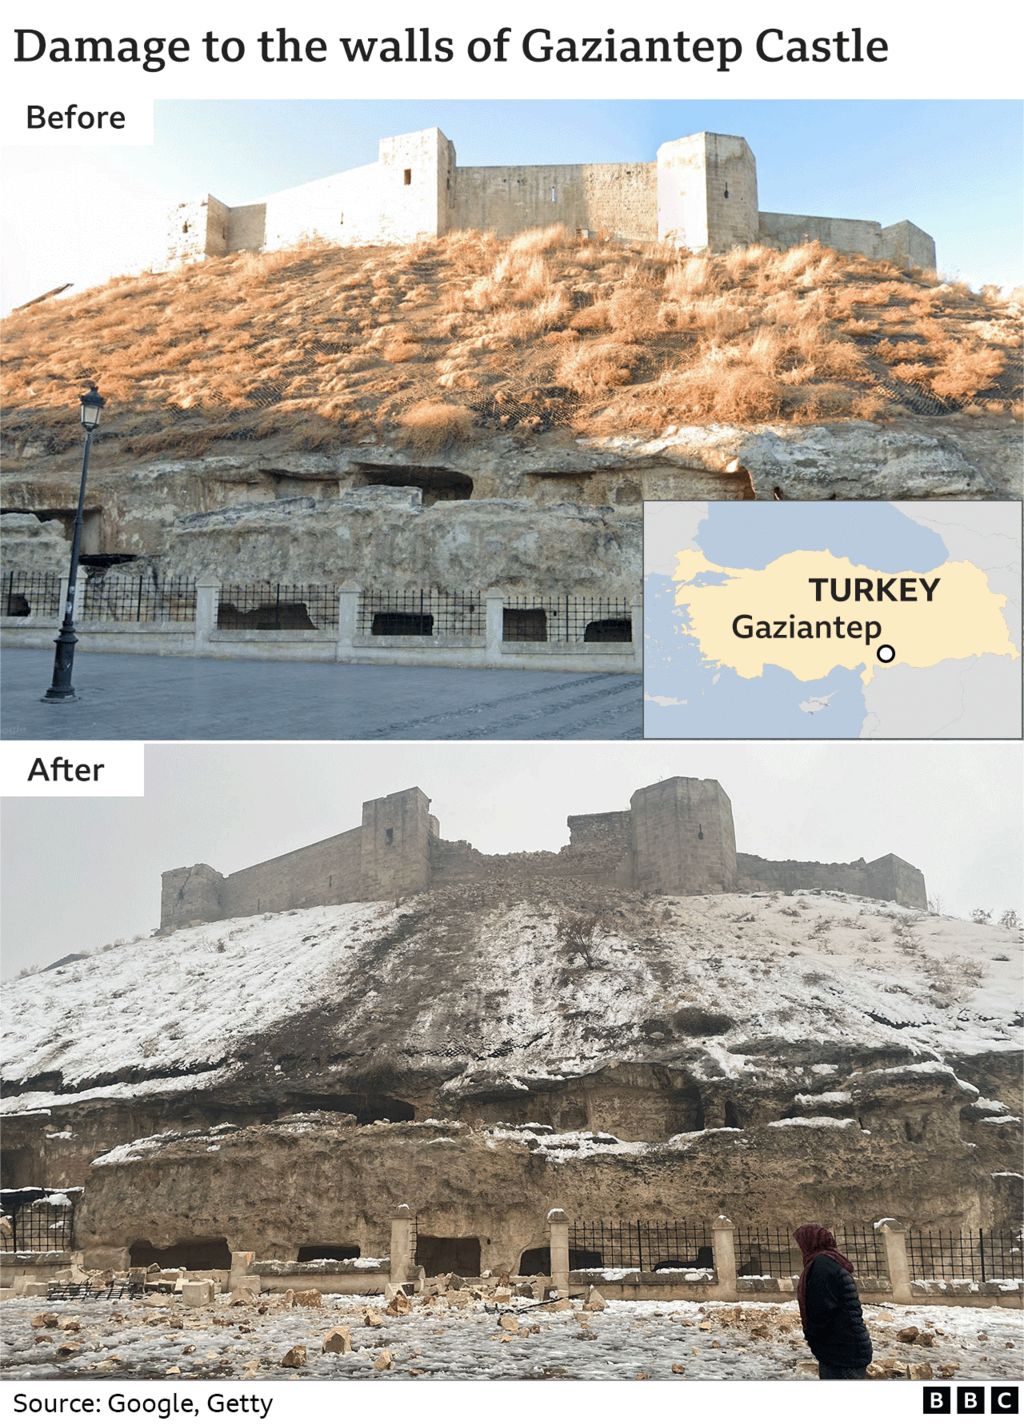 Images showing damage to the walls of Gaziantep Castle